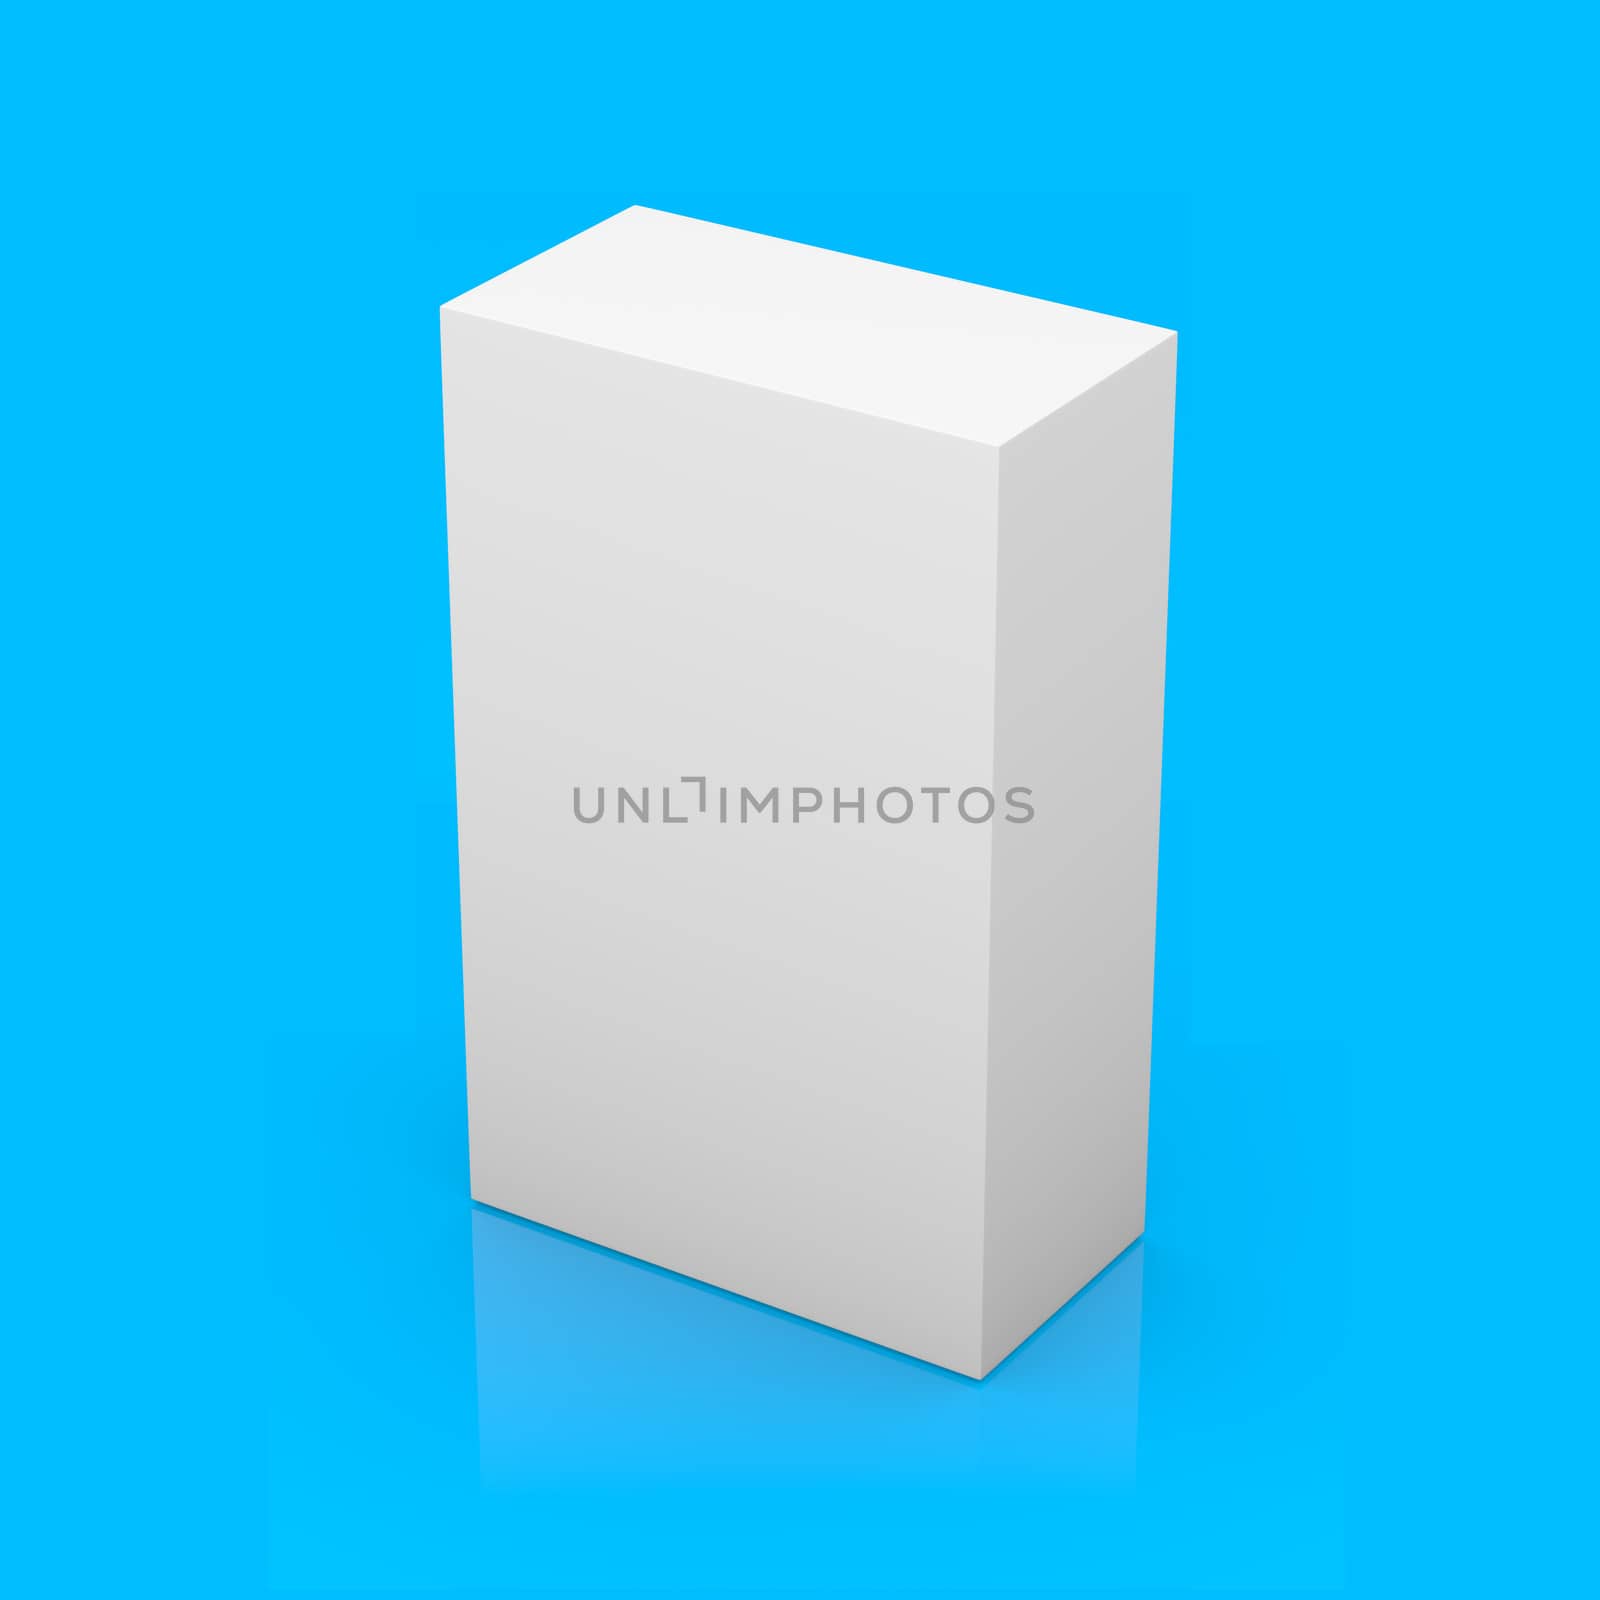 White blank box on blue background with reflection